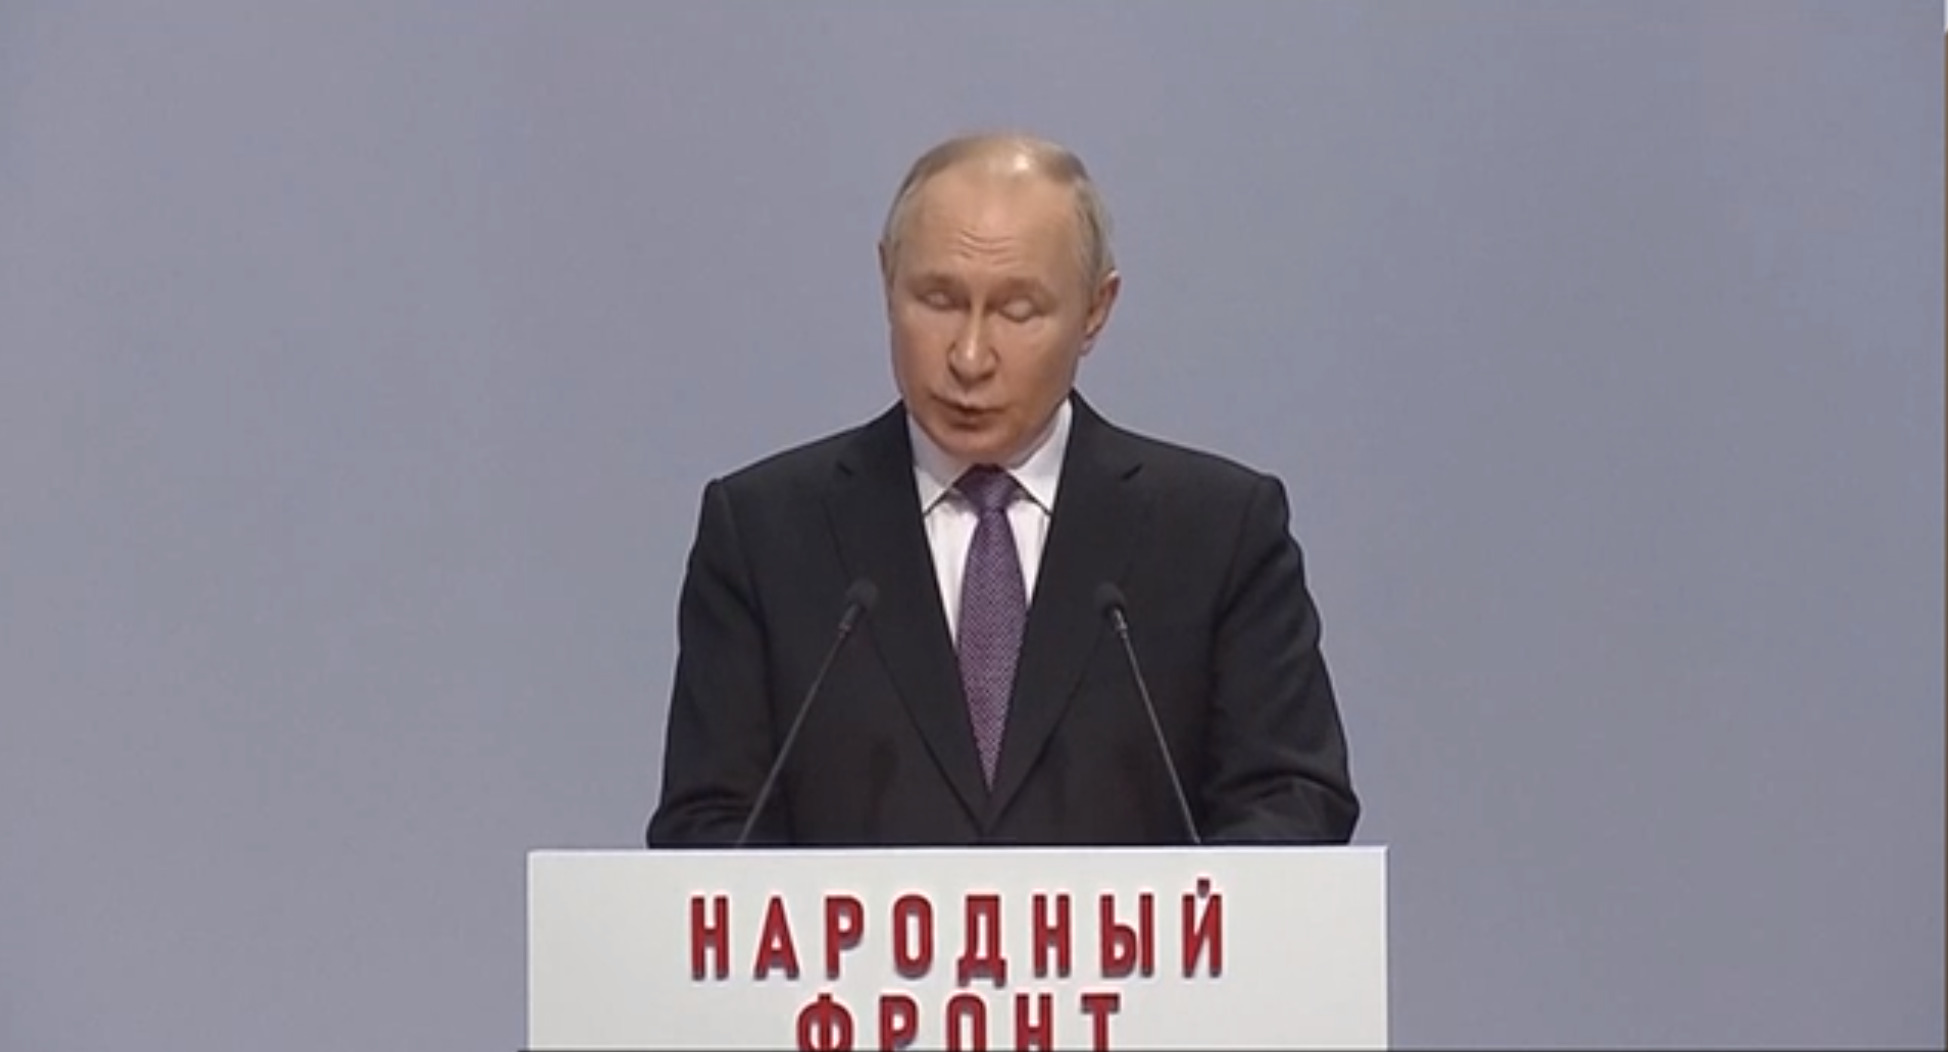 Russian President Vladimir Putin in an official setting, contemplating the recent stance taken by France